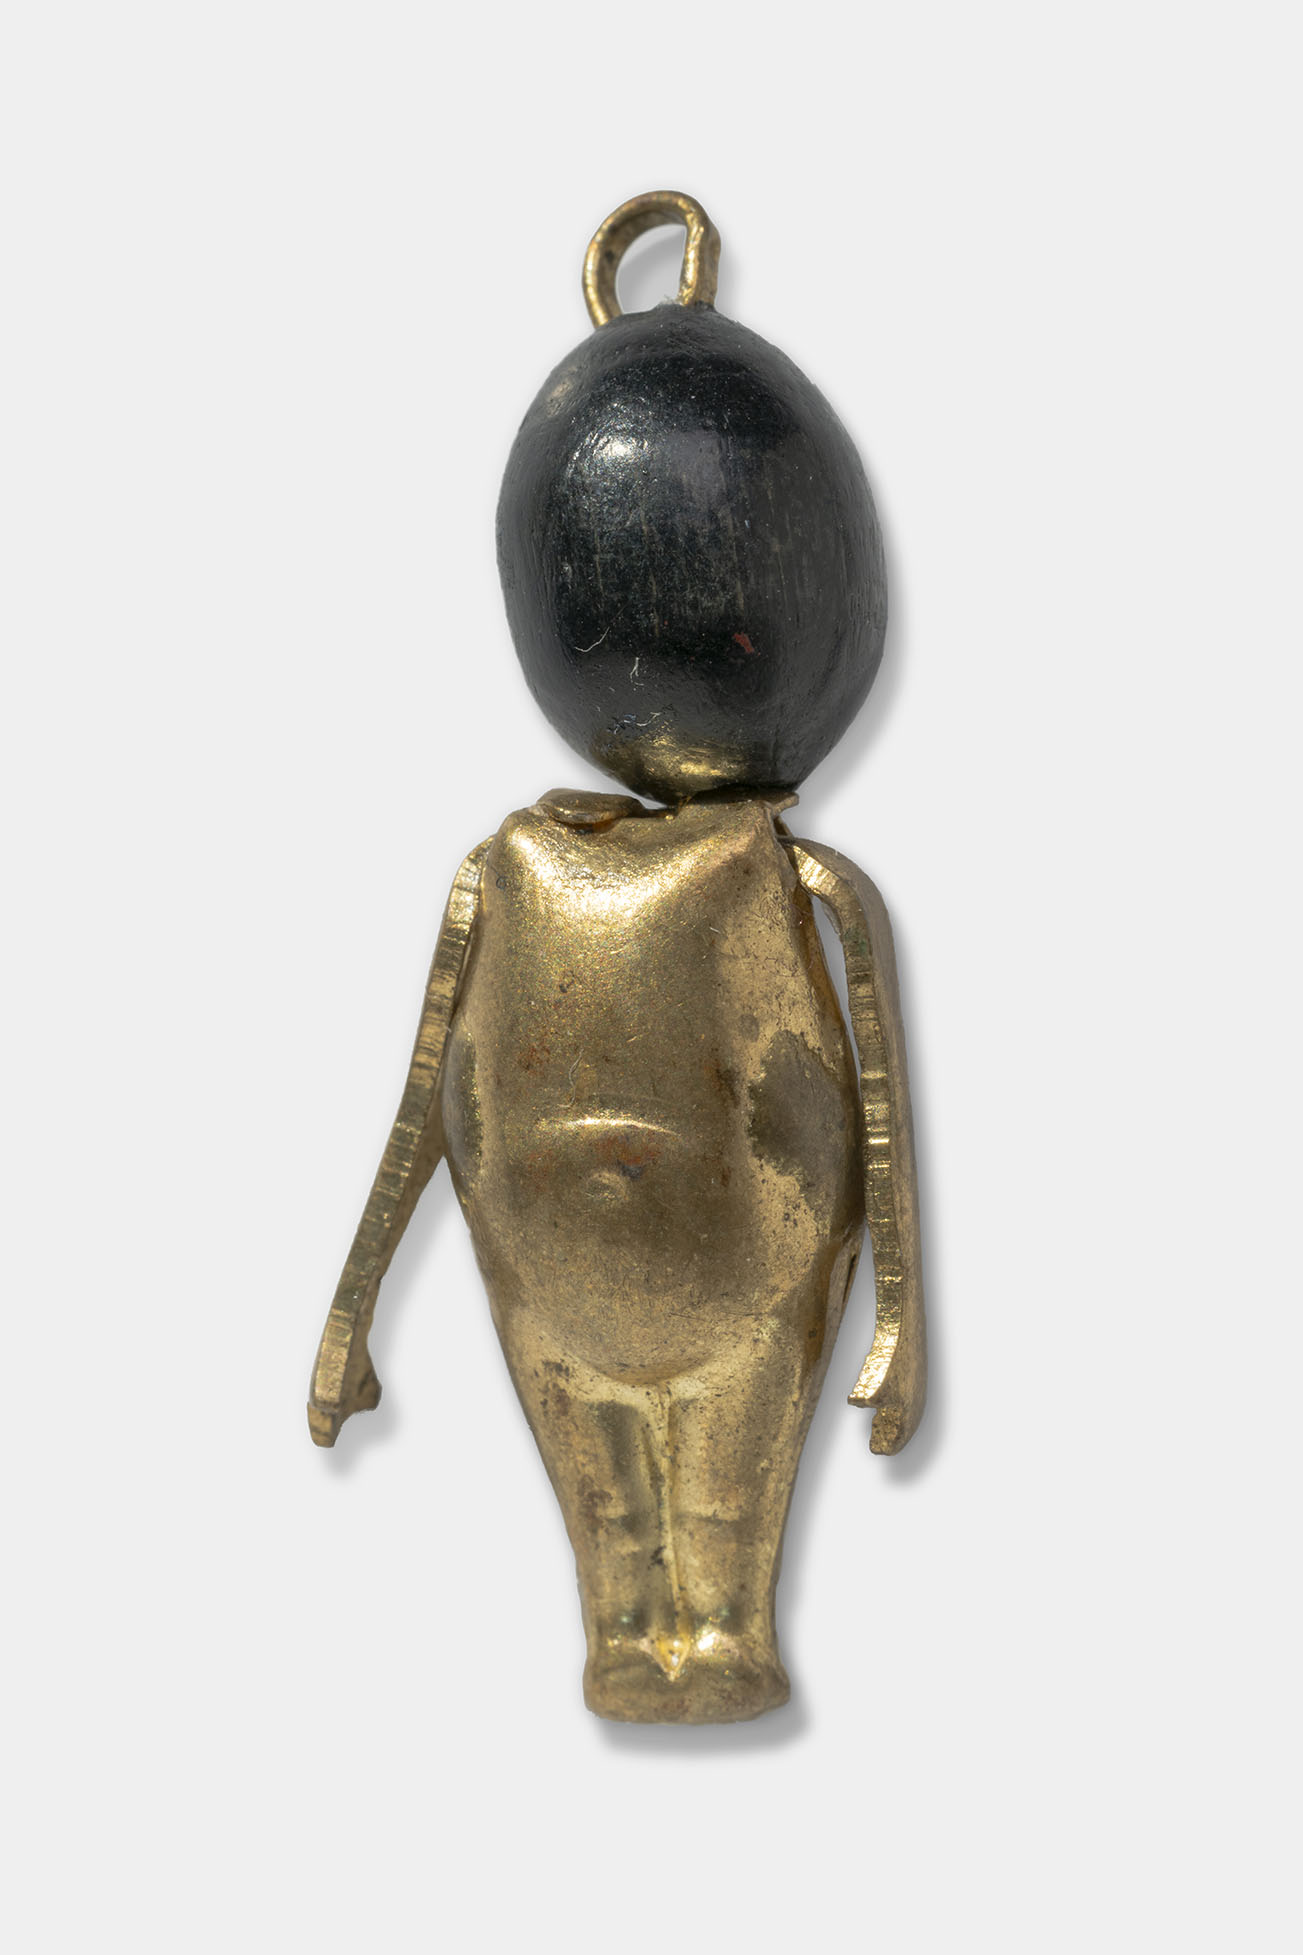 Charm shaped like a stylized baby with a gold-colored body and dark wood head.